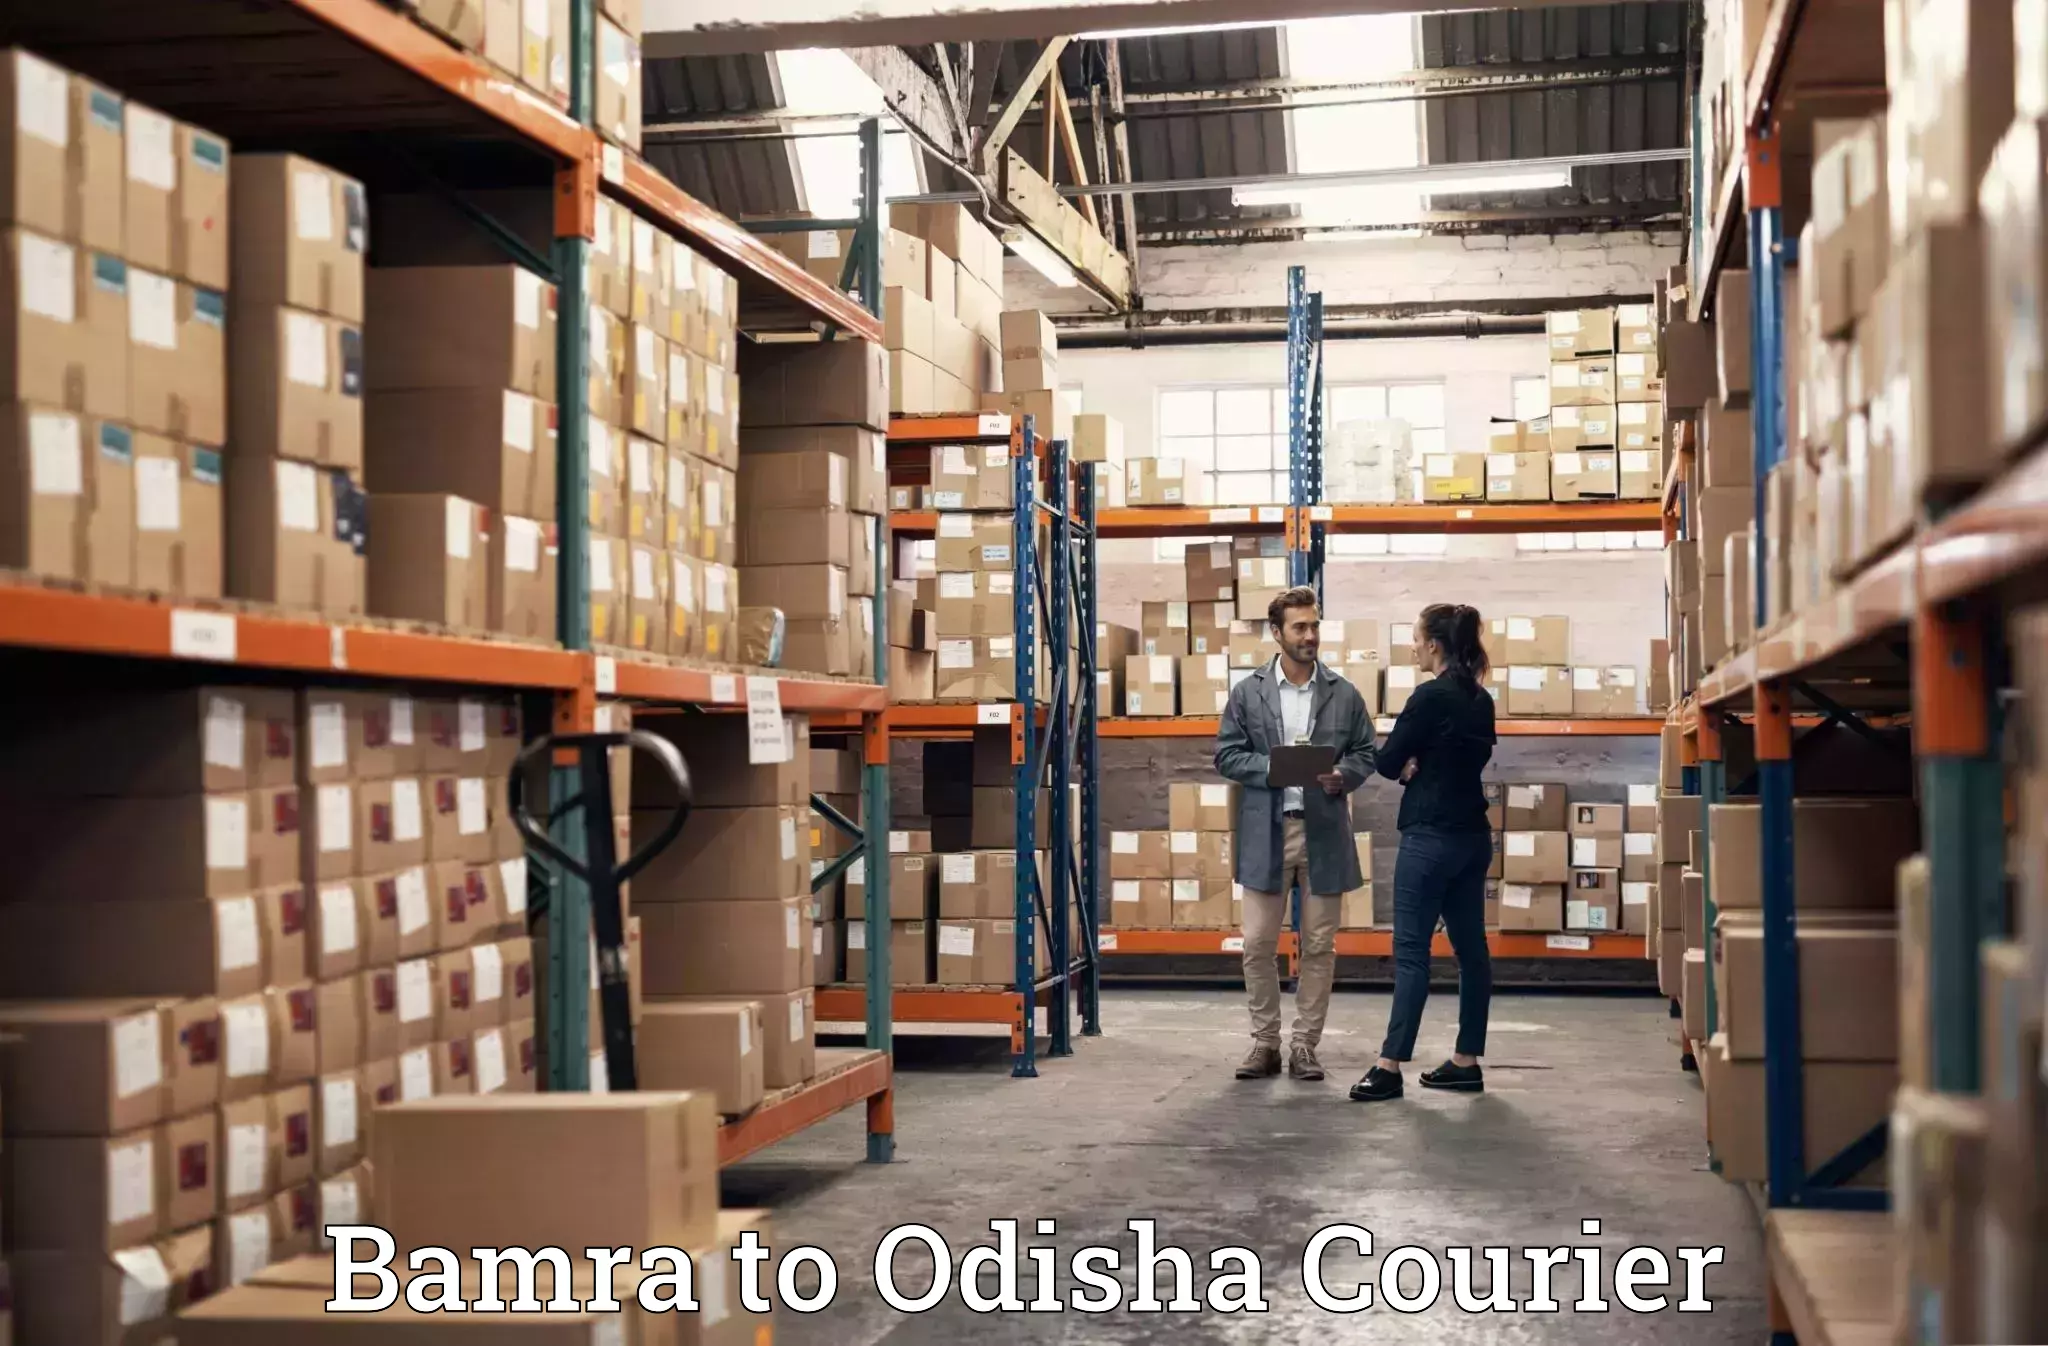 Furniture moving specialists Bamra to Swampatna